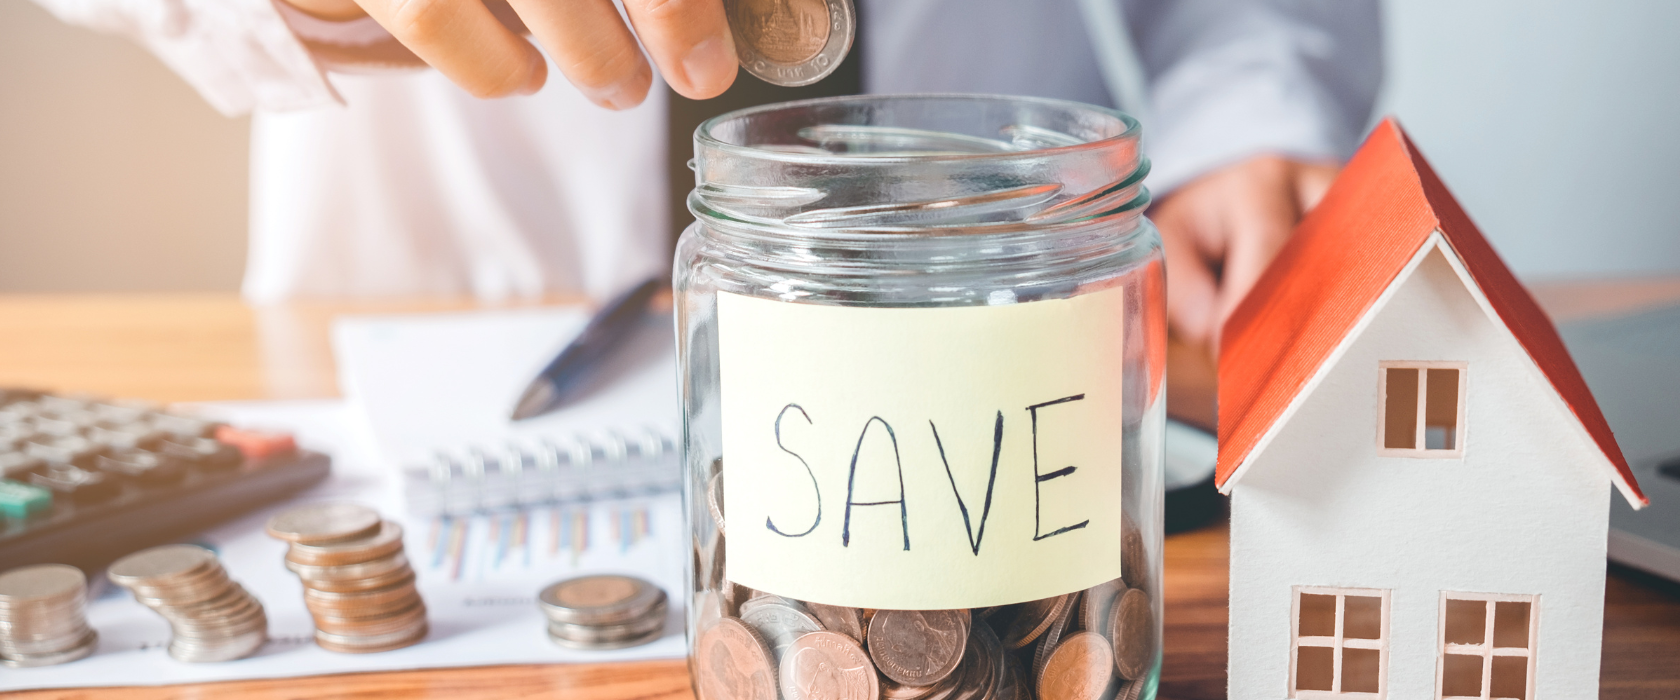 Getting started saving for a home